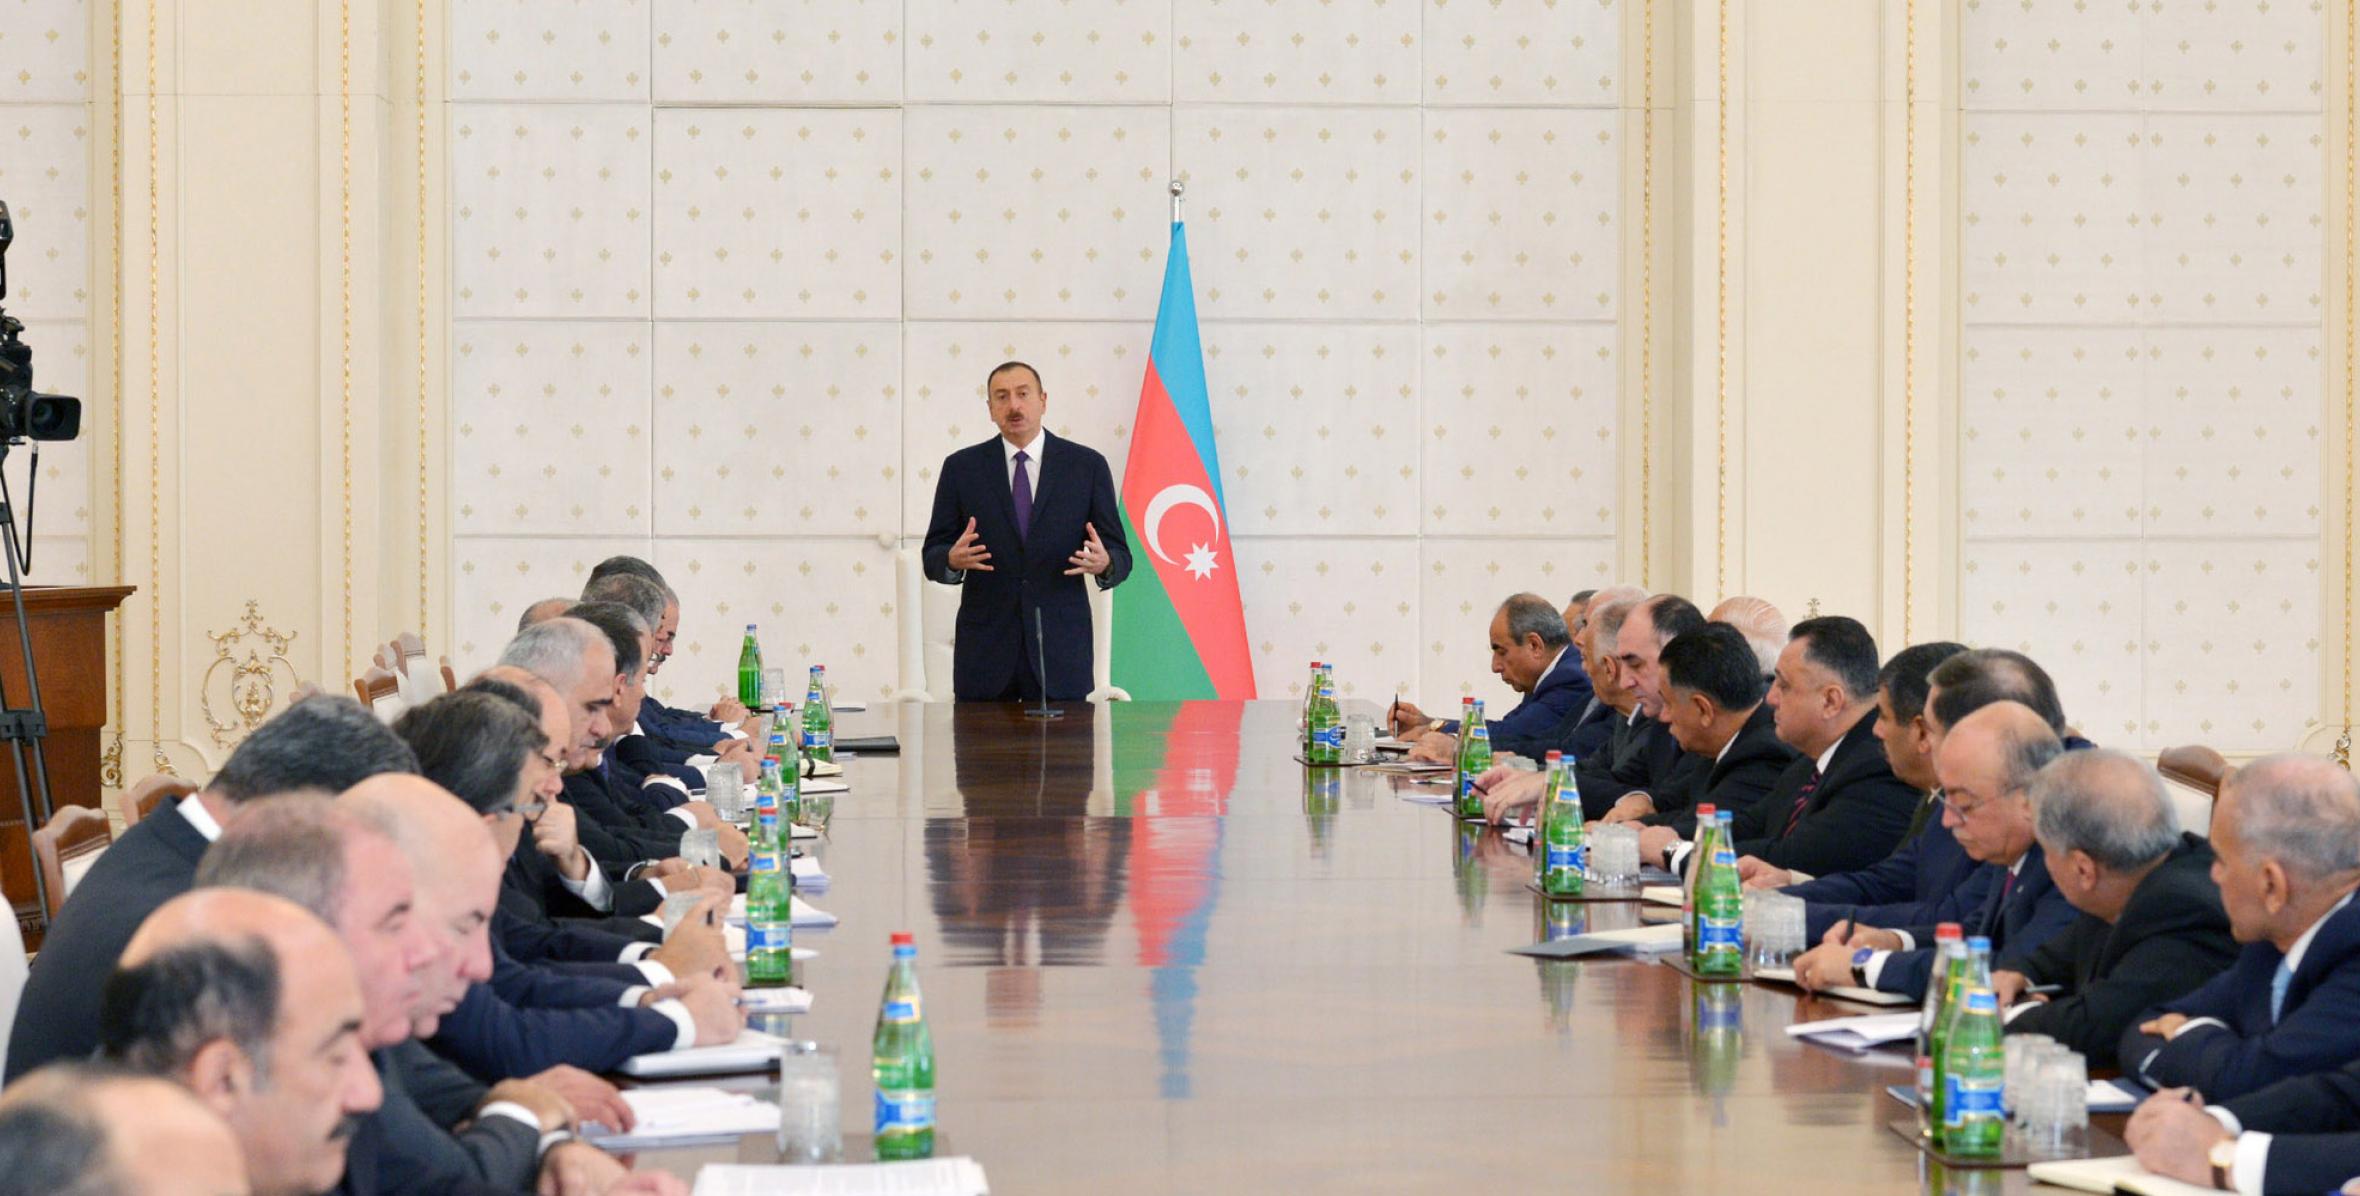 Opening speech by Ilham Aliyev at the meeting of the Cabinet of Ministers dedicated to the results of socioeconomic development in nine months of 2014 and objectives for the future